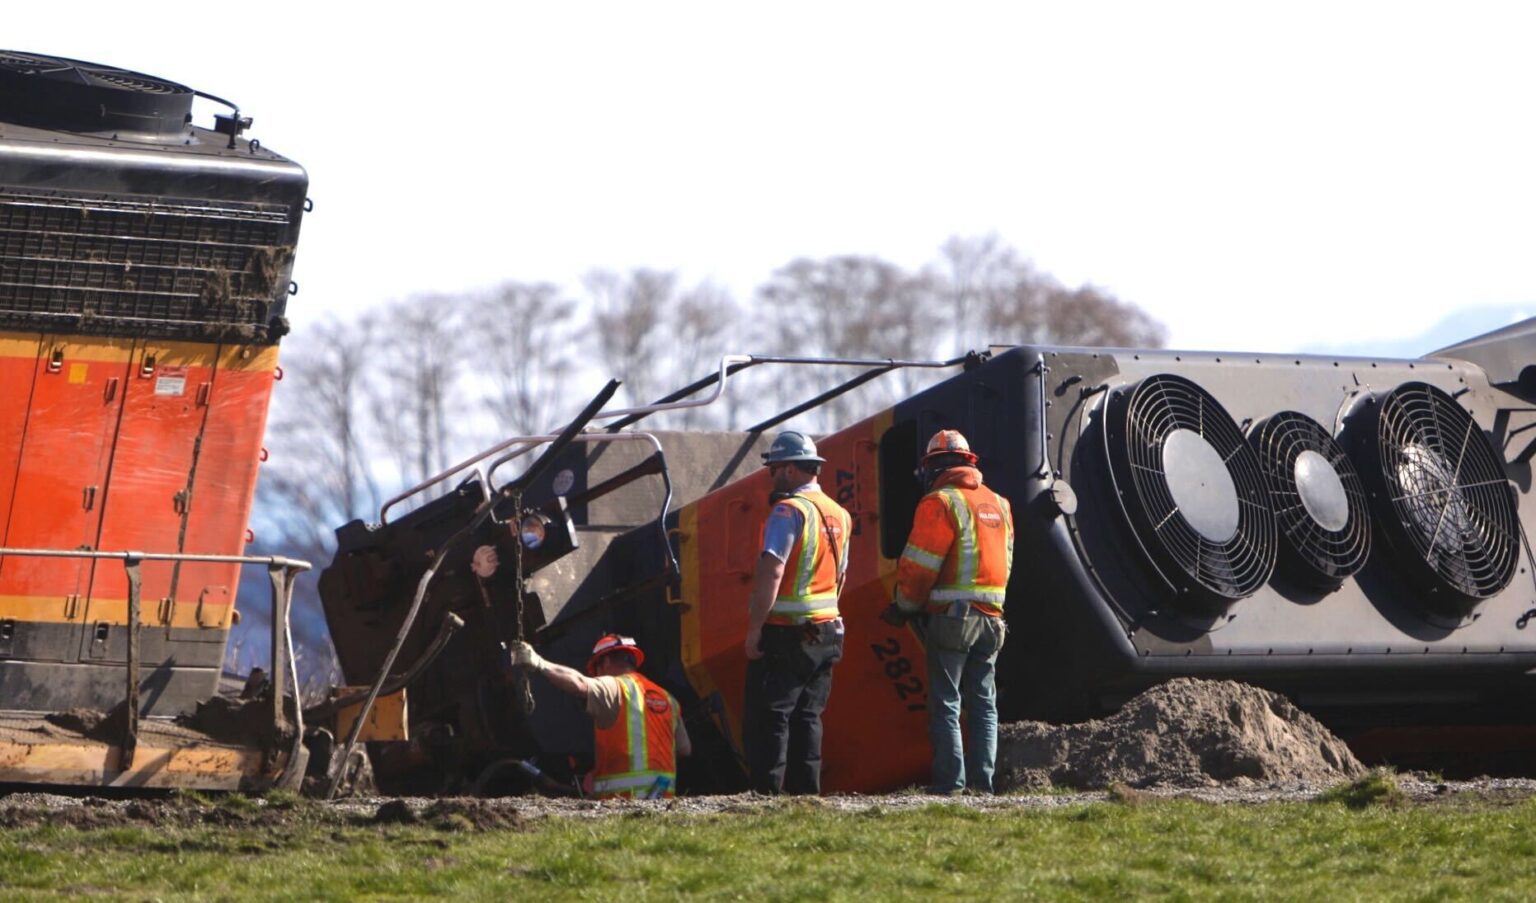 Crews examine an overturned locomotive wearing safety helmets and bright orange safety suits as they inspect deeper in the dirt.